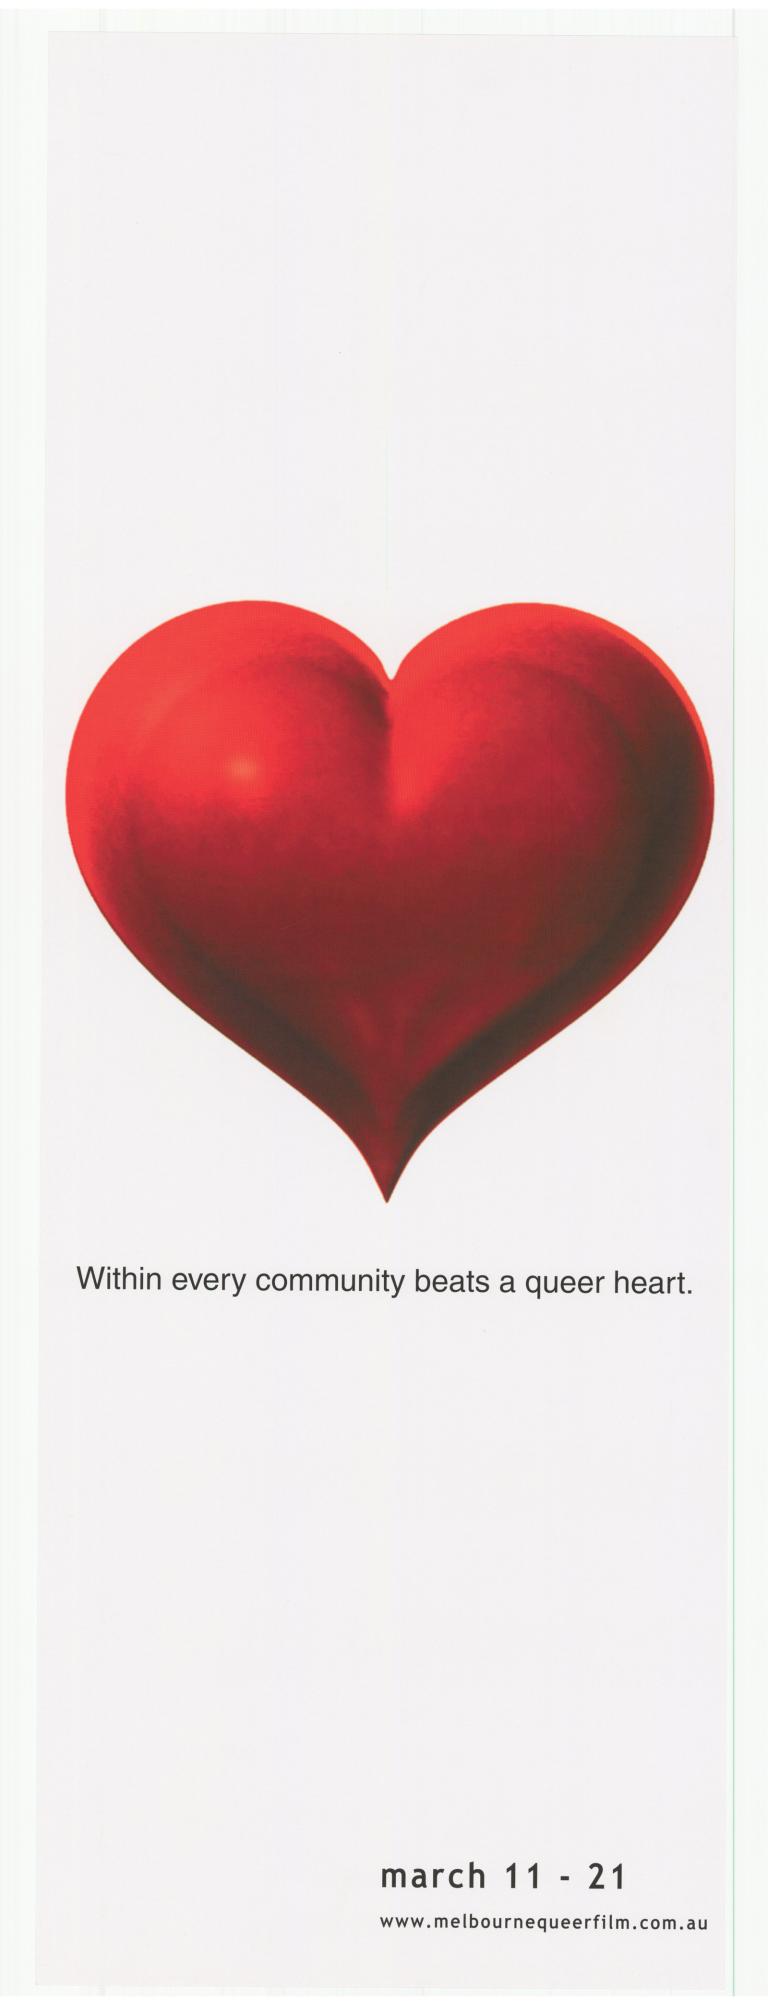 Poster for the 2004 Melbourne Queer Film Poster showing a blank background with a large bright red heart shape in the centre. Tagline reads 'Within every community beats a queer heart'.